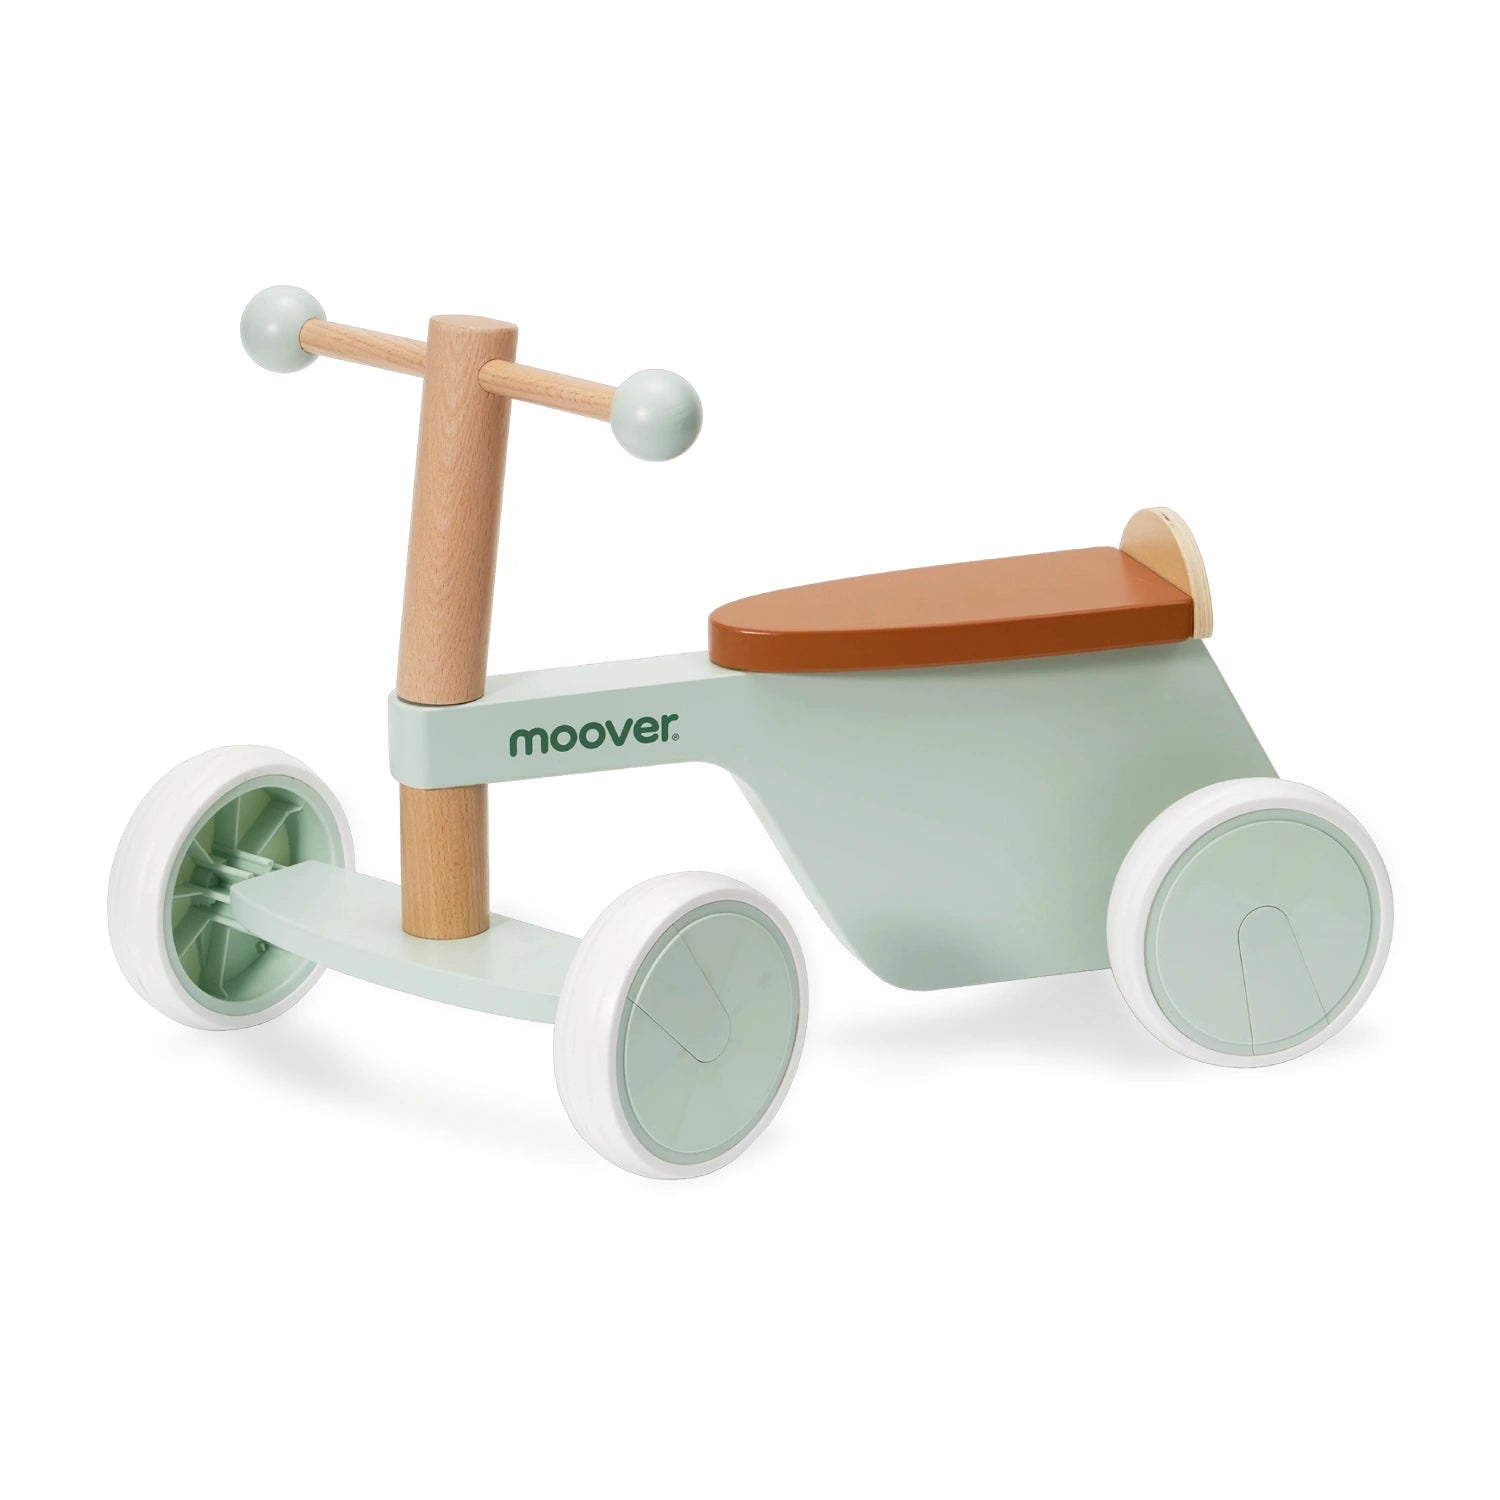 An image of Moover Wooden Balance Bike For Toddlers - Light Green